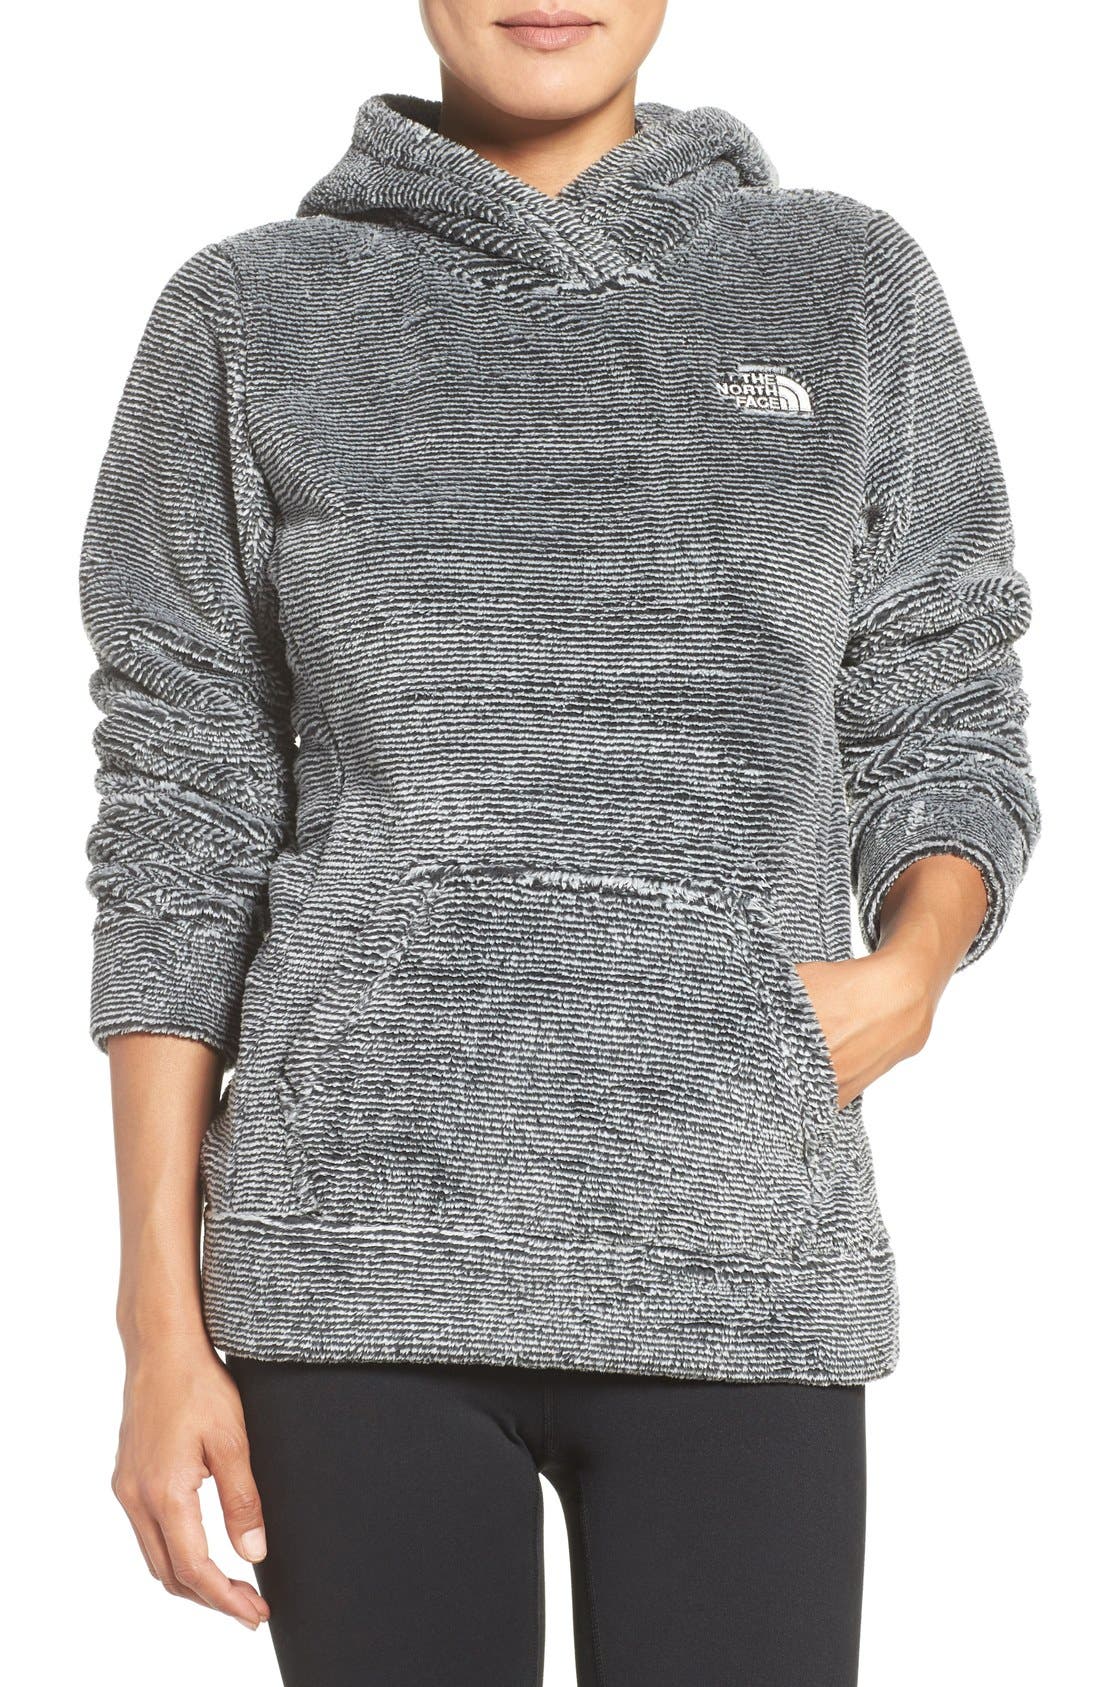 north face osito hoodie